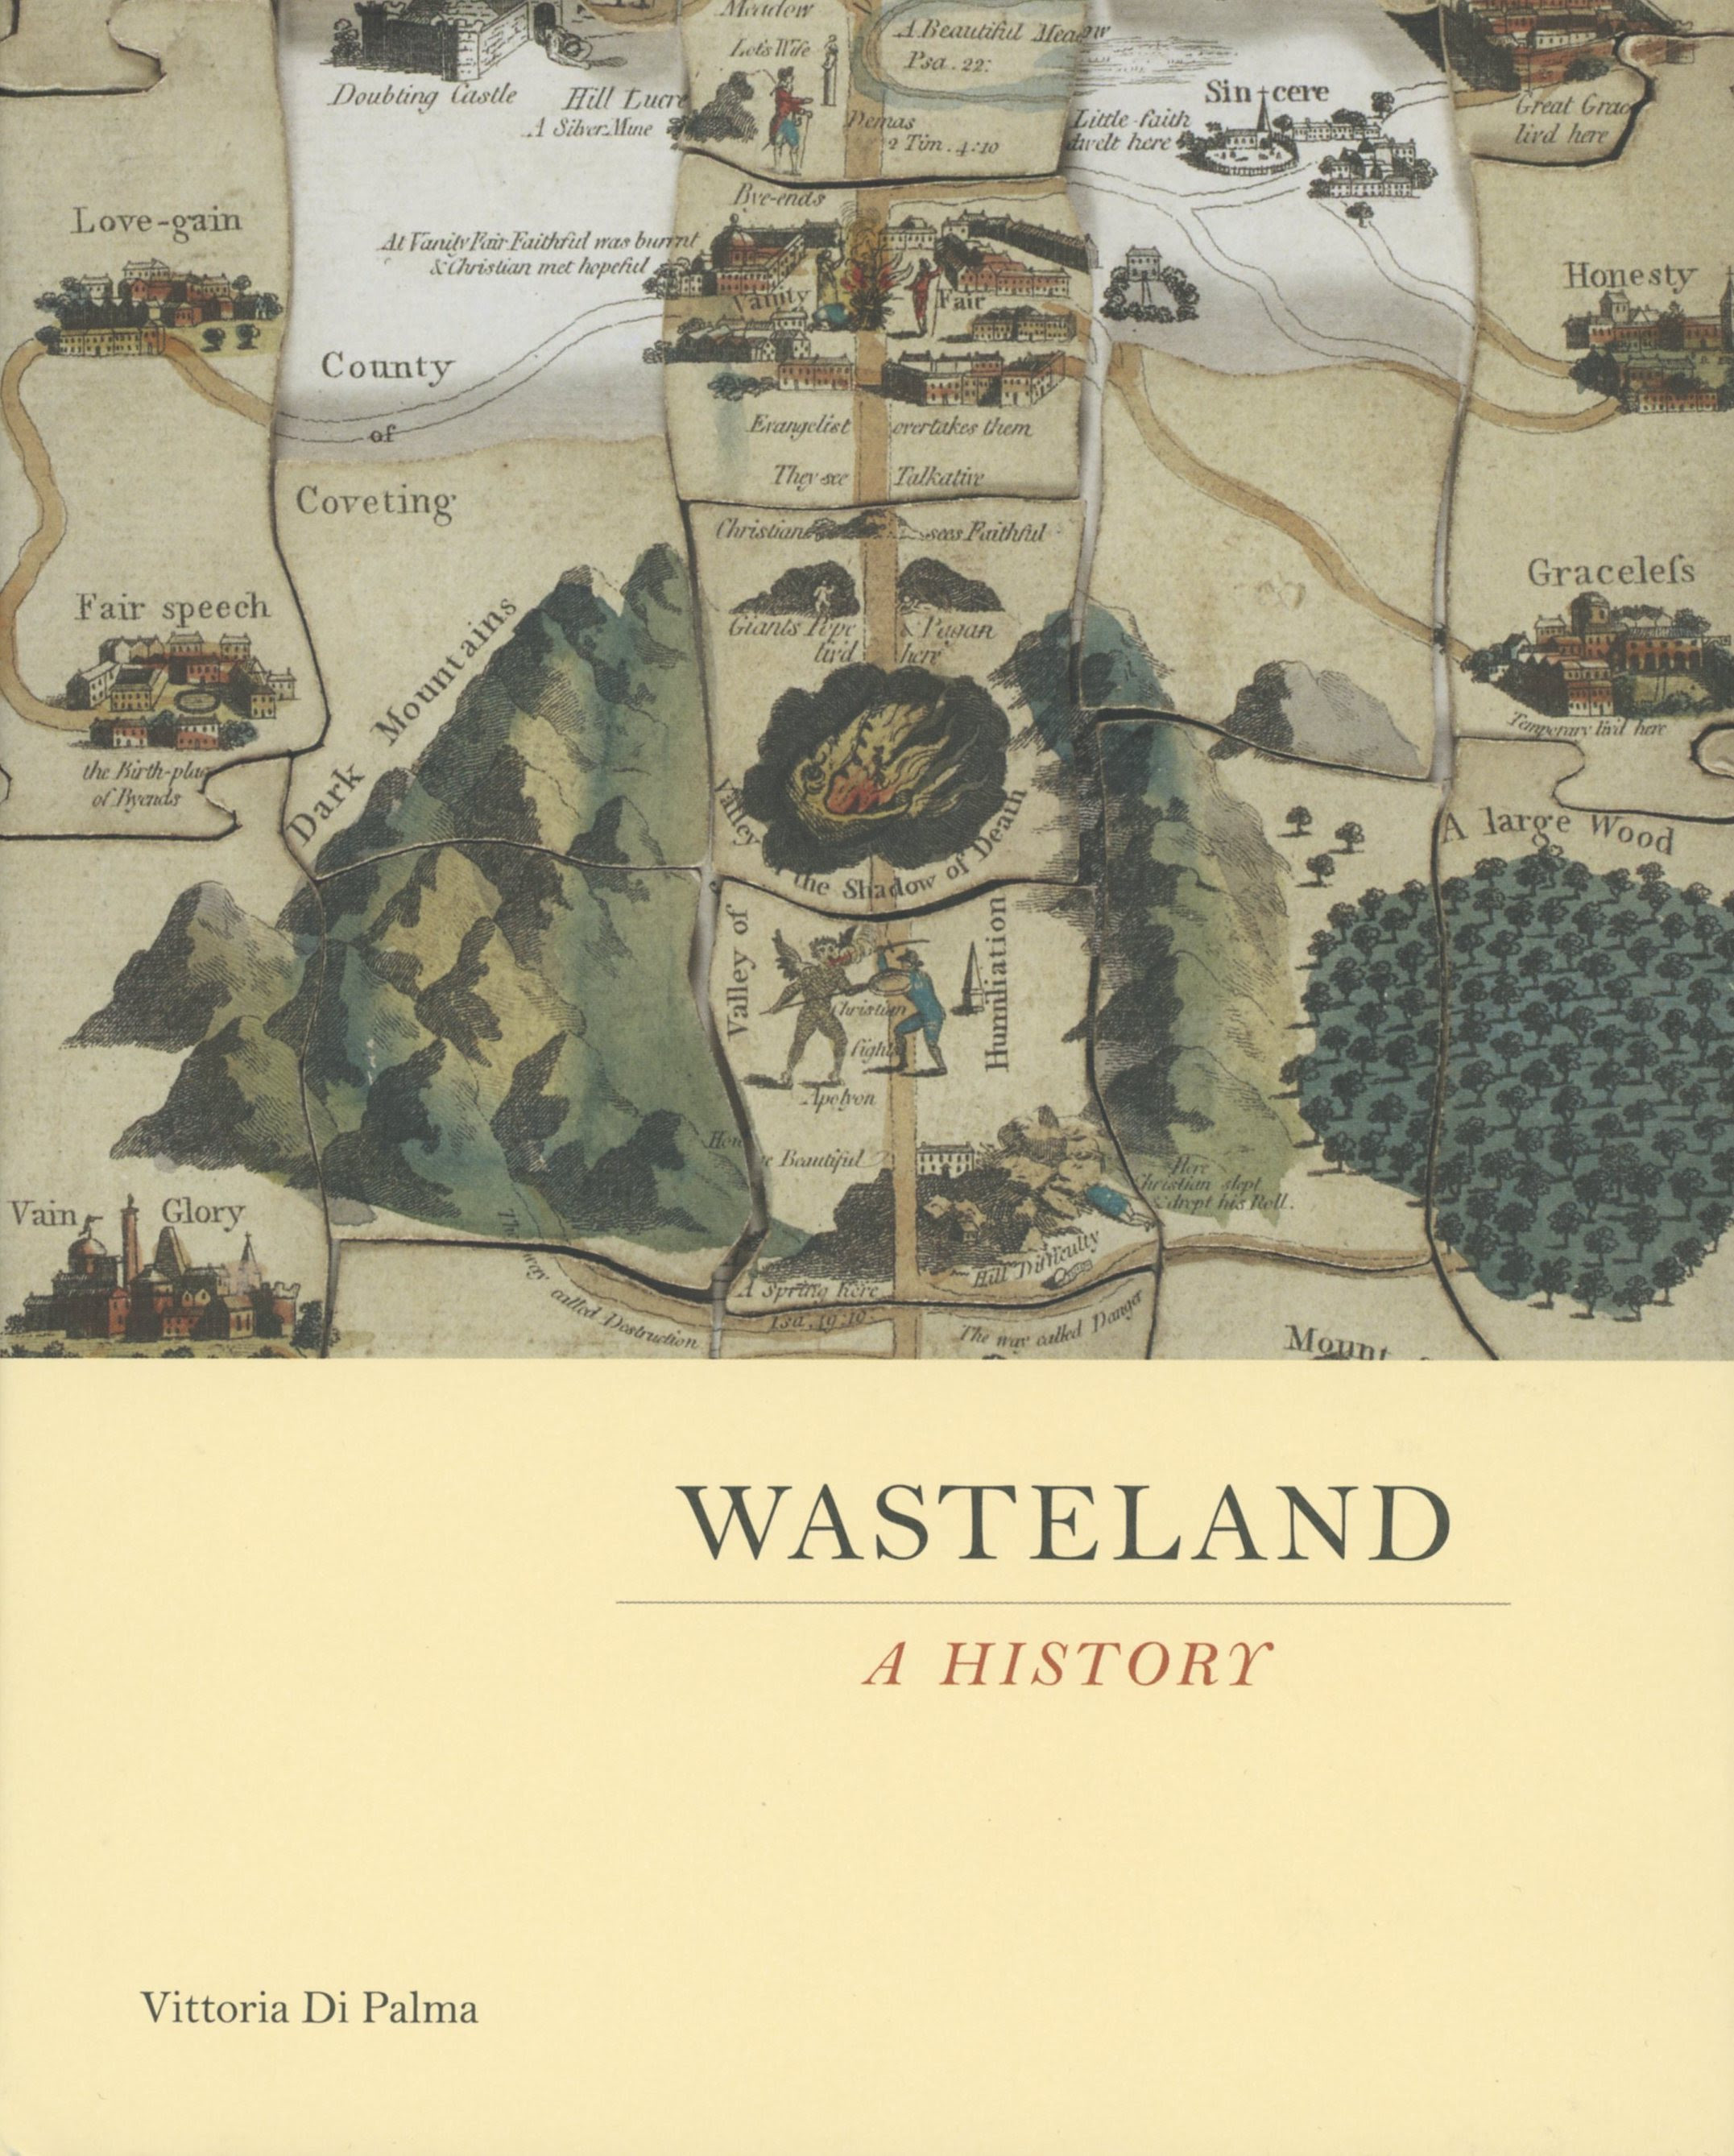 "WASTELAND" book cover